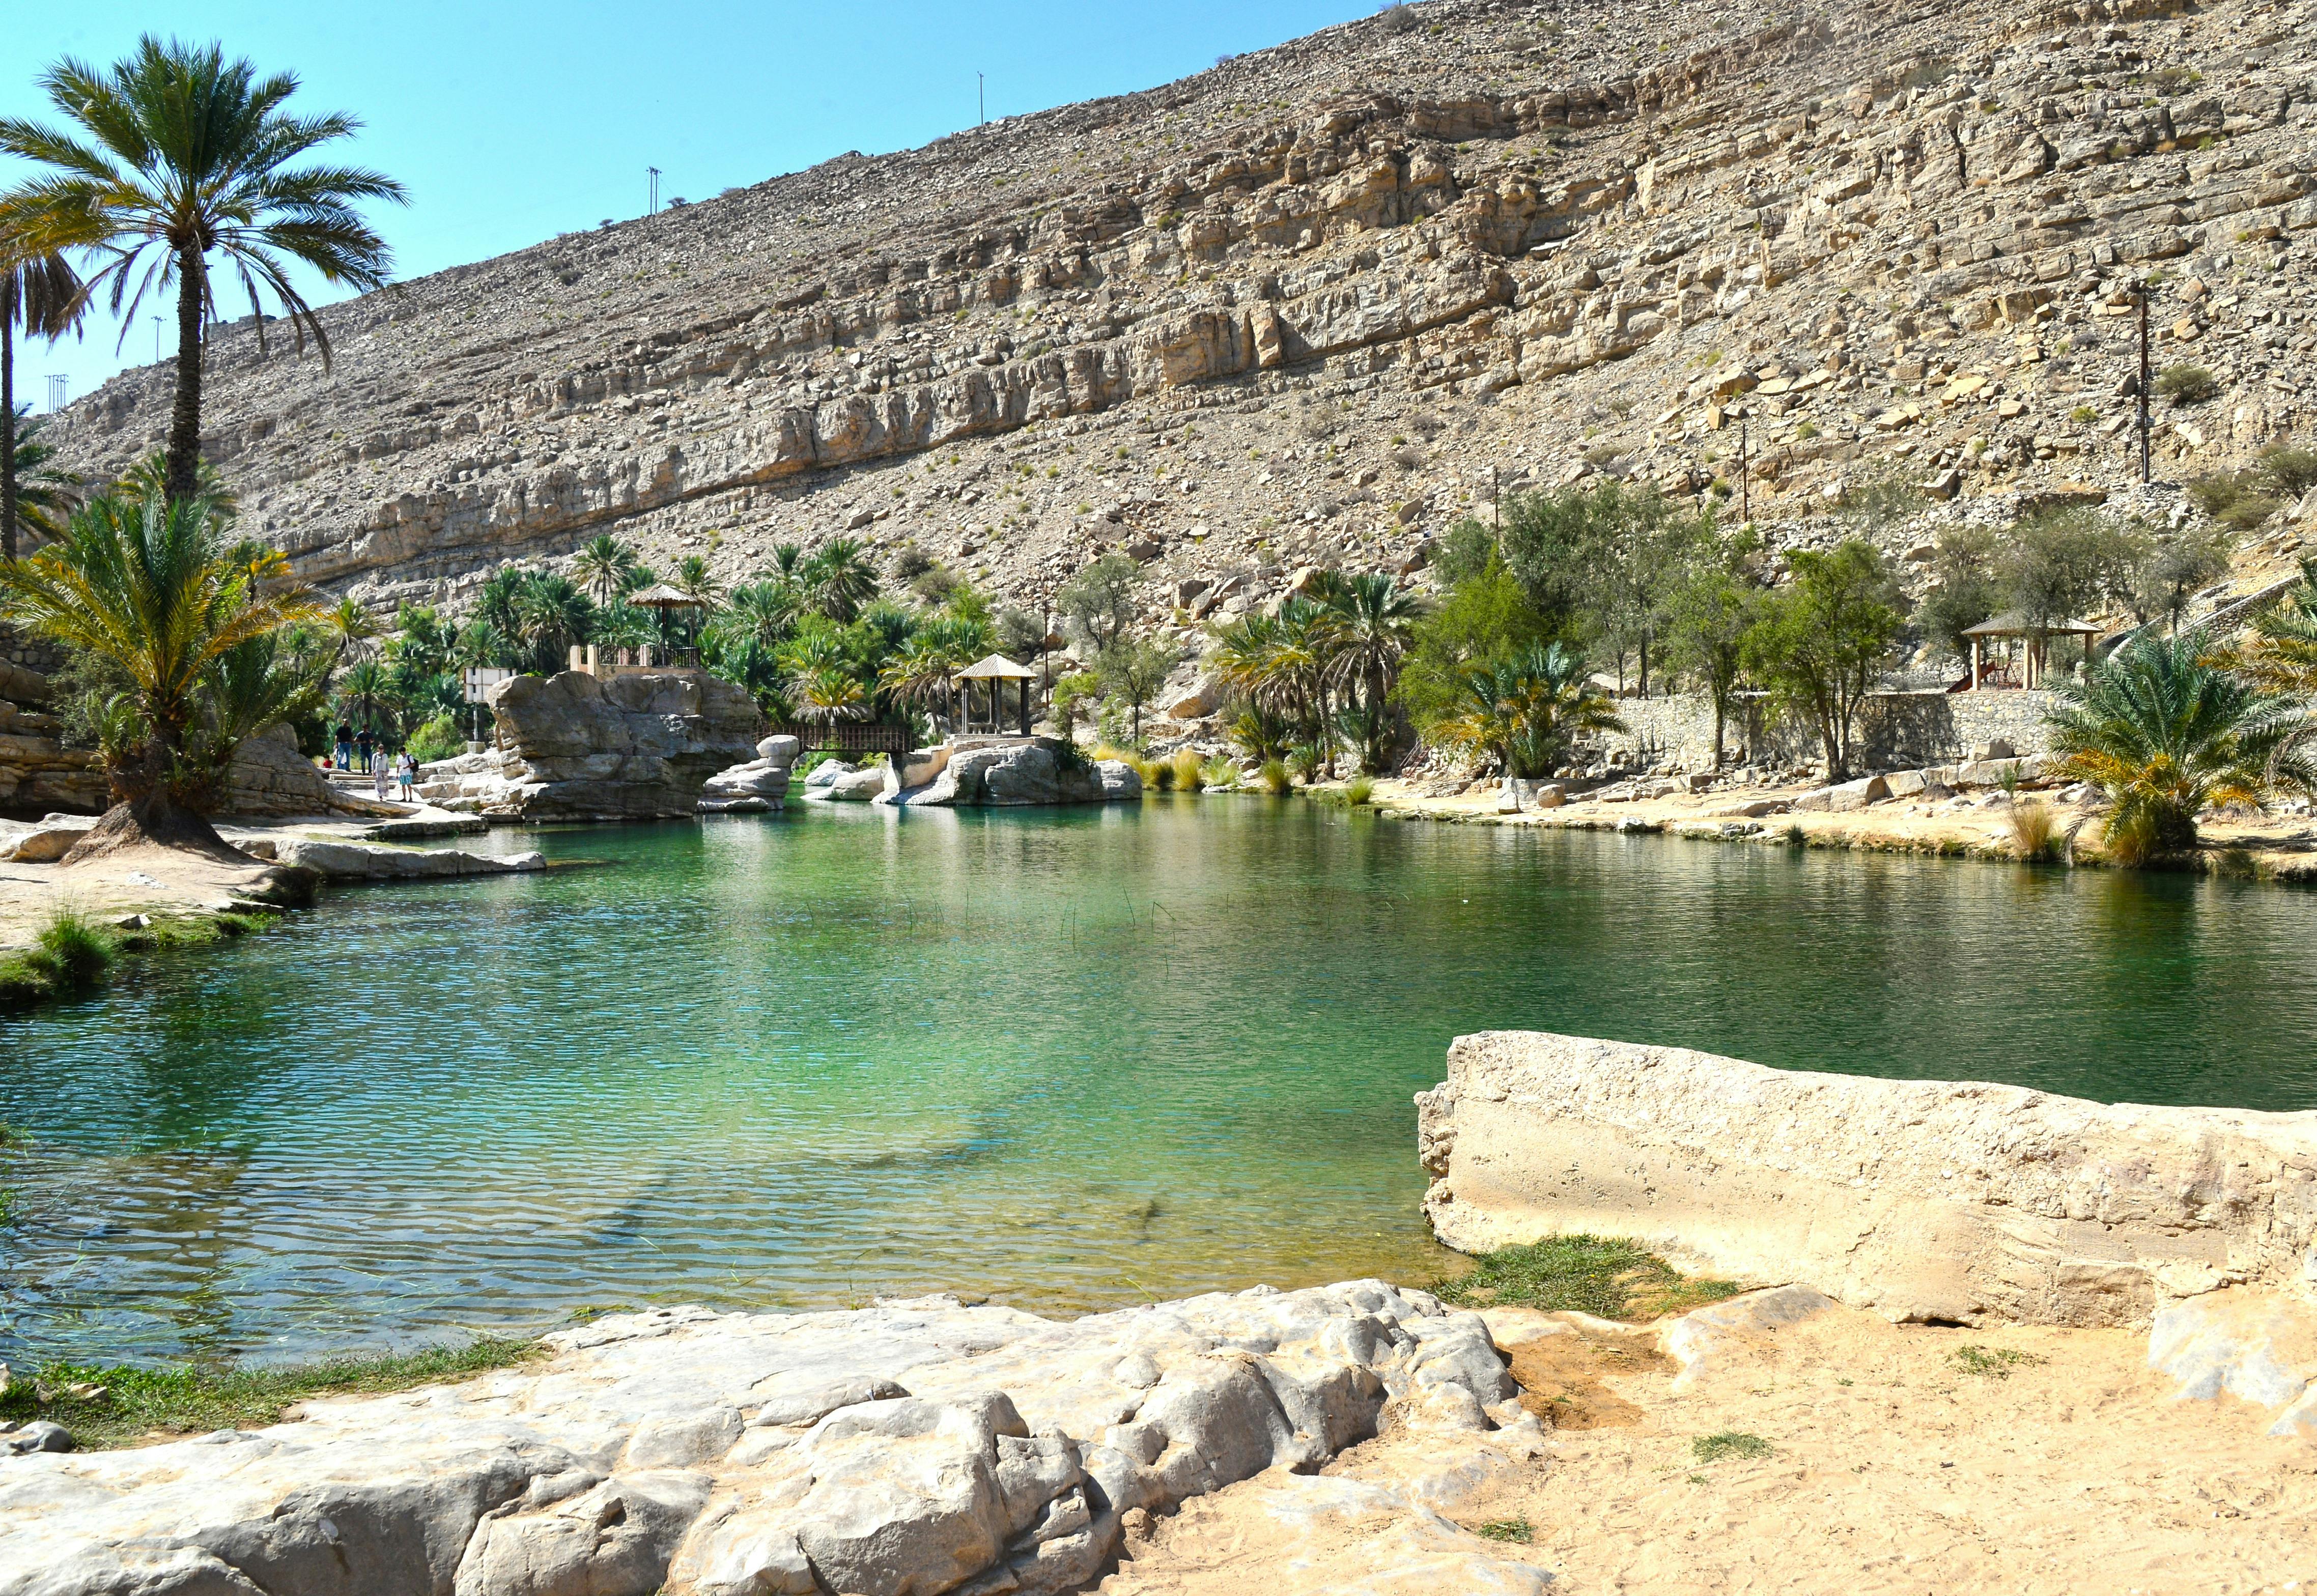 Private tour to Wadi Bani Khalid and desert villages from Muscat with lunch